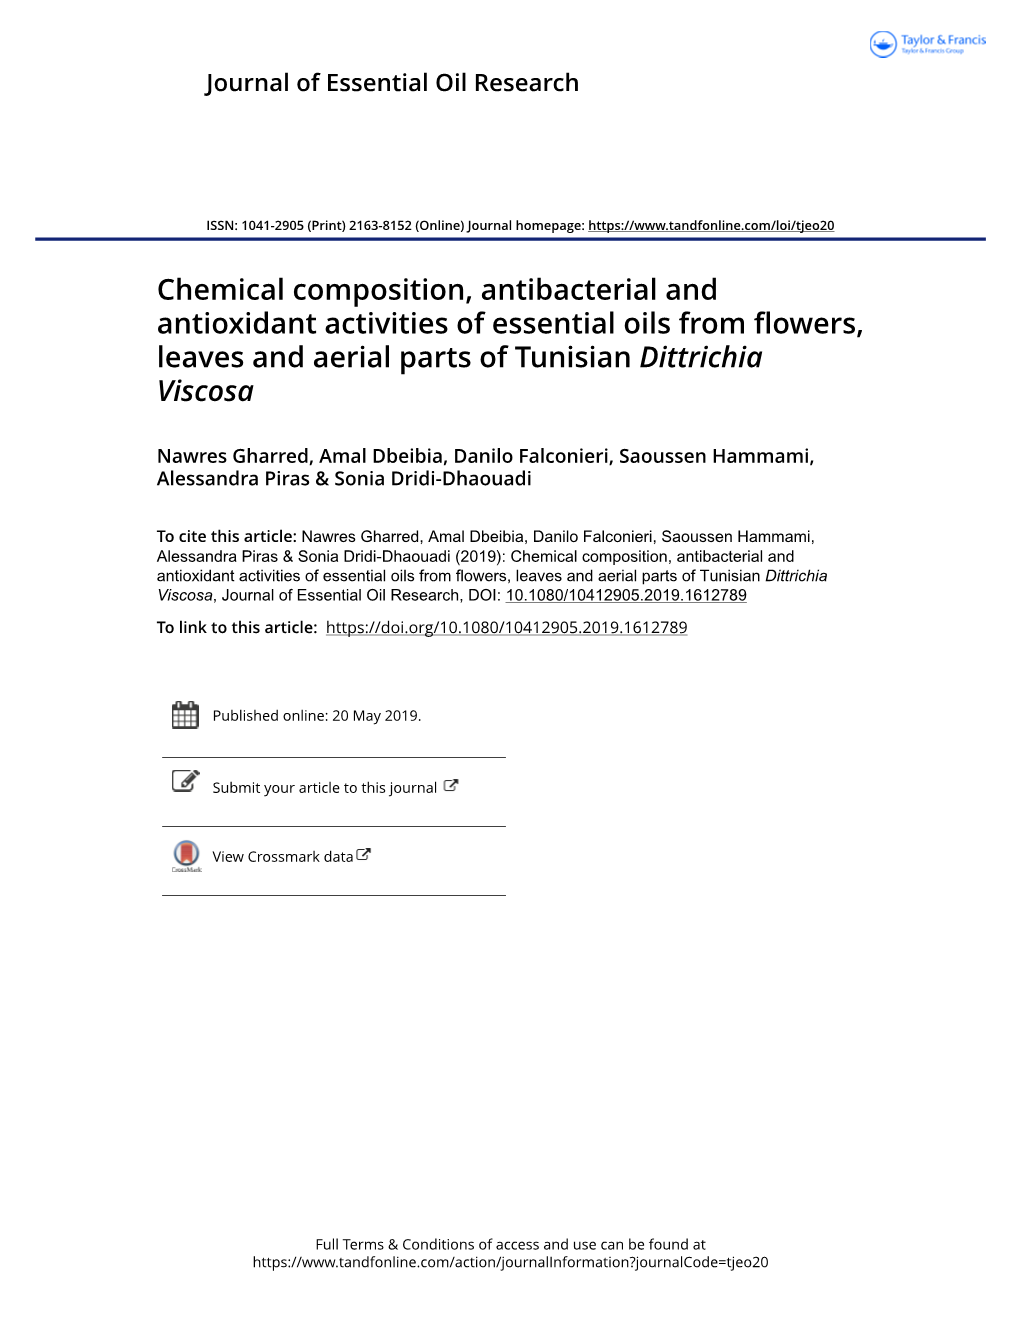 Chemical Composition, Antibacterial and Antioxidant Activities of Essential Oils from Flowers, Leaves and Aerial Parts of Tunisian Dittrichia Viscosa